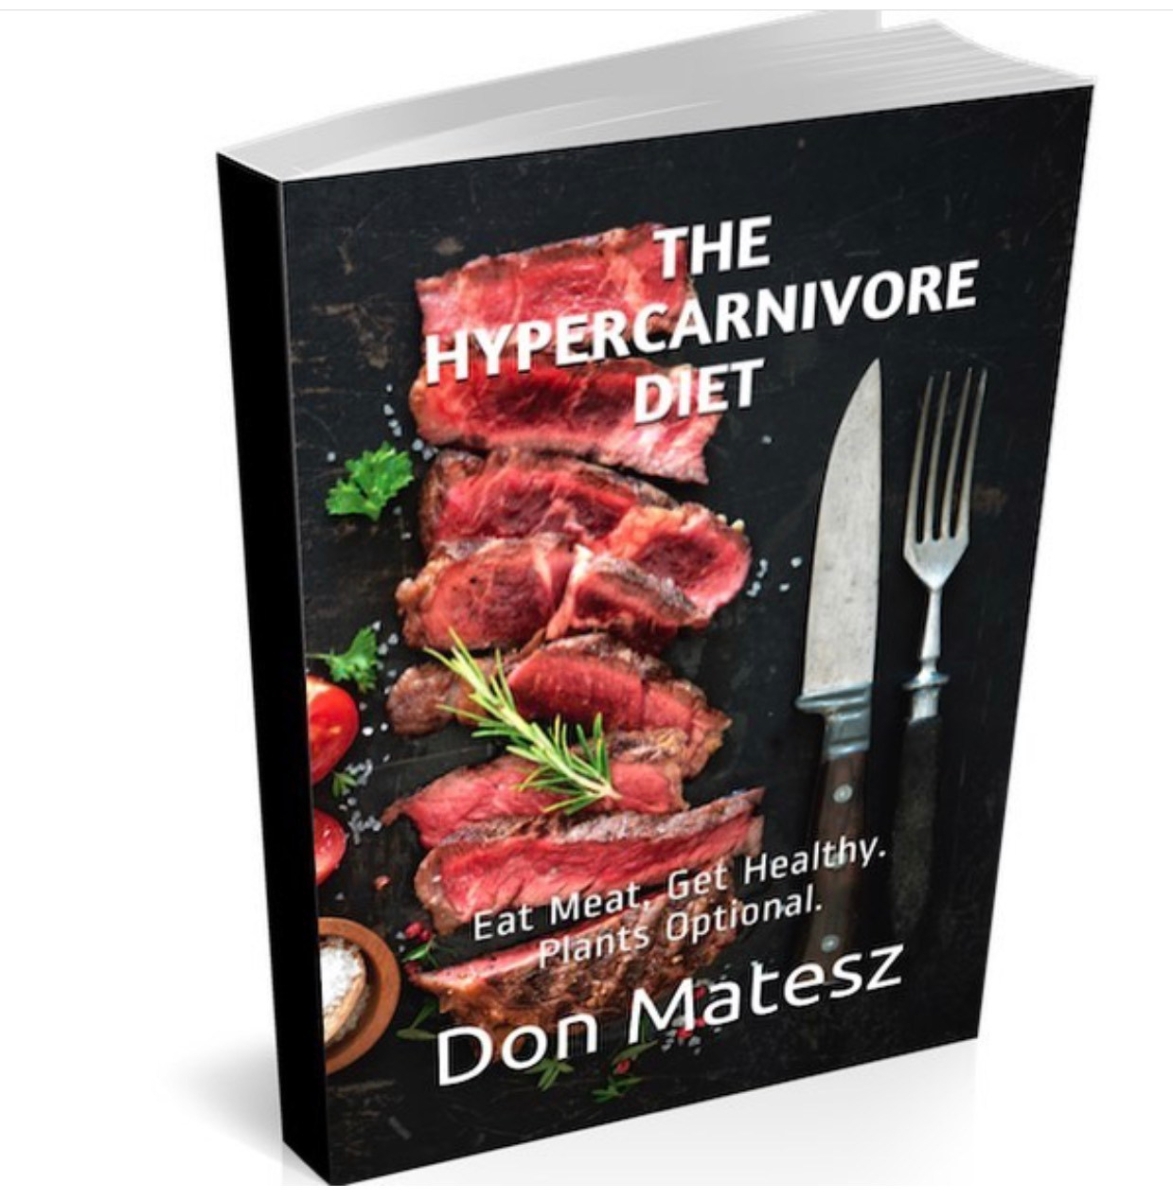 Carnivore Diet success stories – with Don Matesz aka The Hypercarnivore ...1173 x 1200